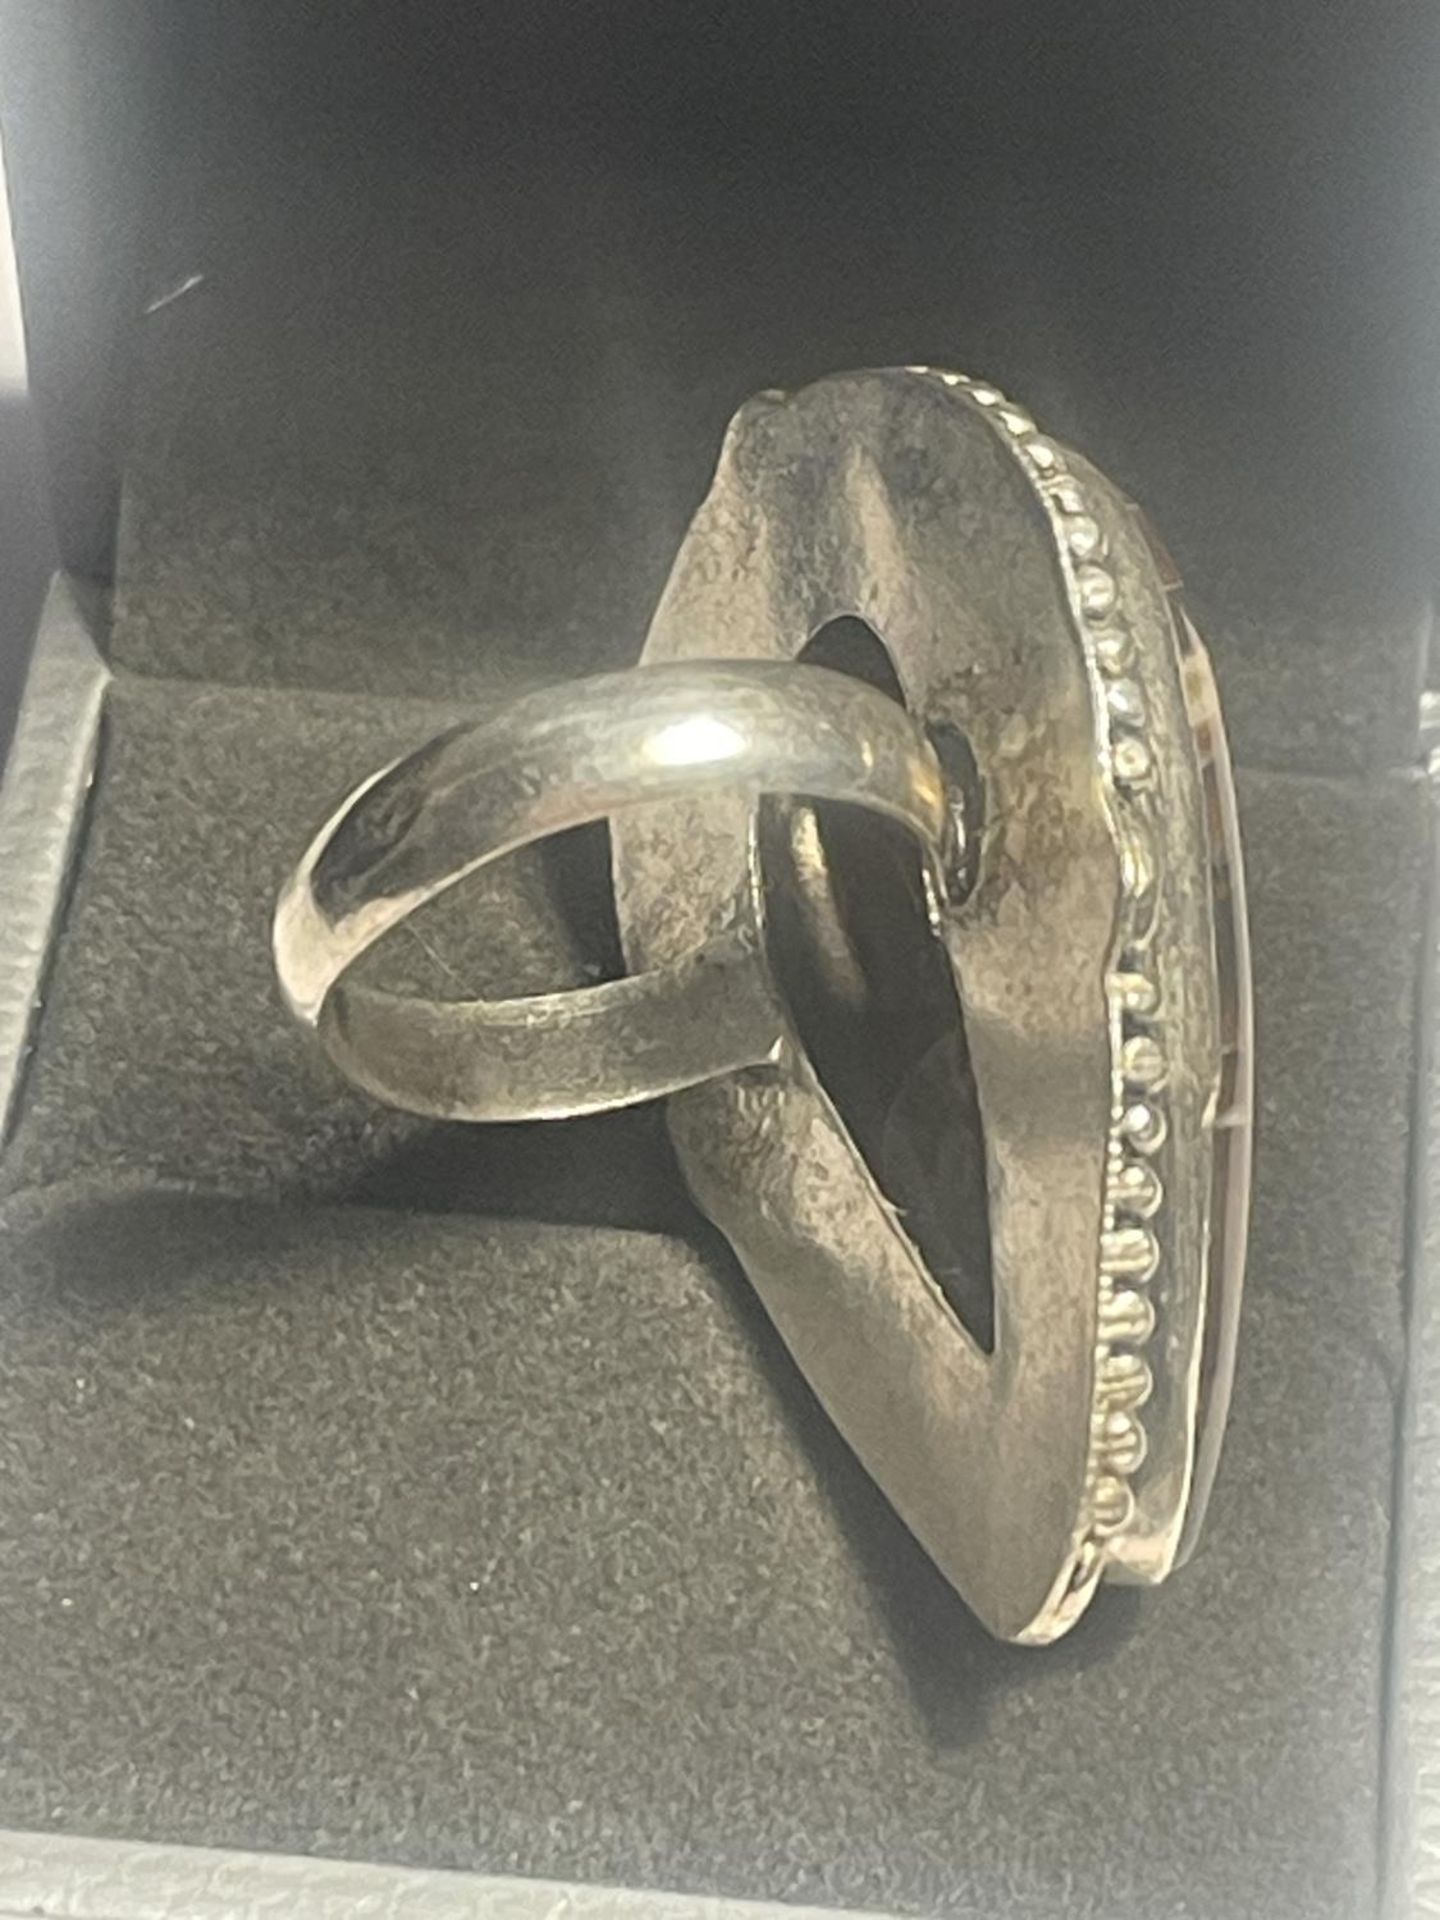 A SILVER RING WITH A FOSSIL STONE IN A PRESENTATION BOX - Image 2 of 3